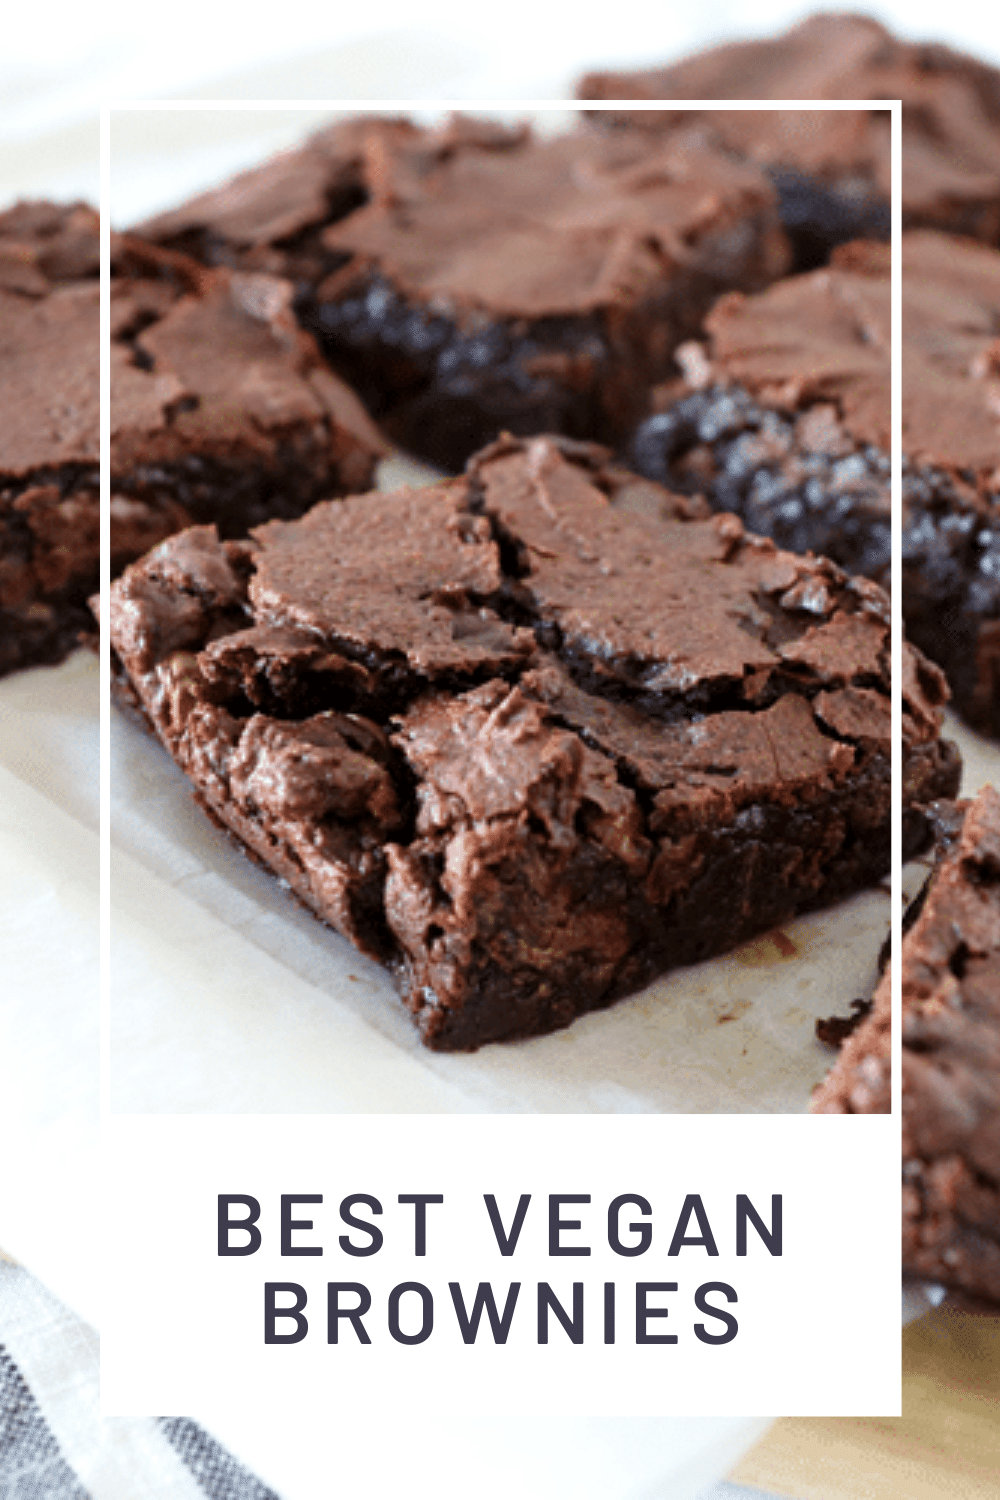 These are hands-down the best vegan brownies you'll ever eat. This recipe is made without eggs or dairy. The vegan brownies turn out fudgy and rich every time and are so easy to make! These taste so good, you'll never know they were healthier. via @somewhatsimple